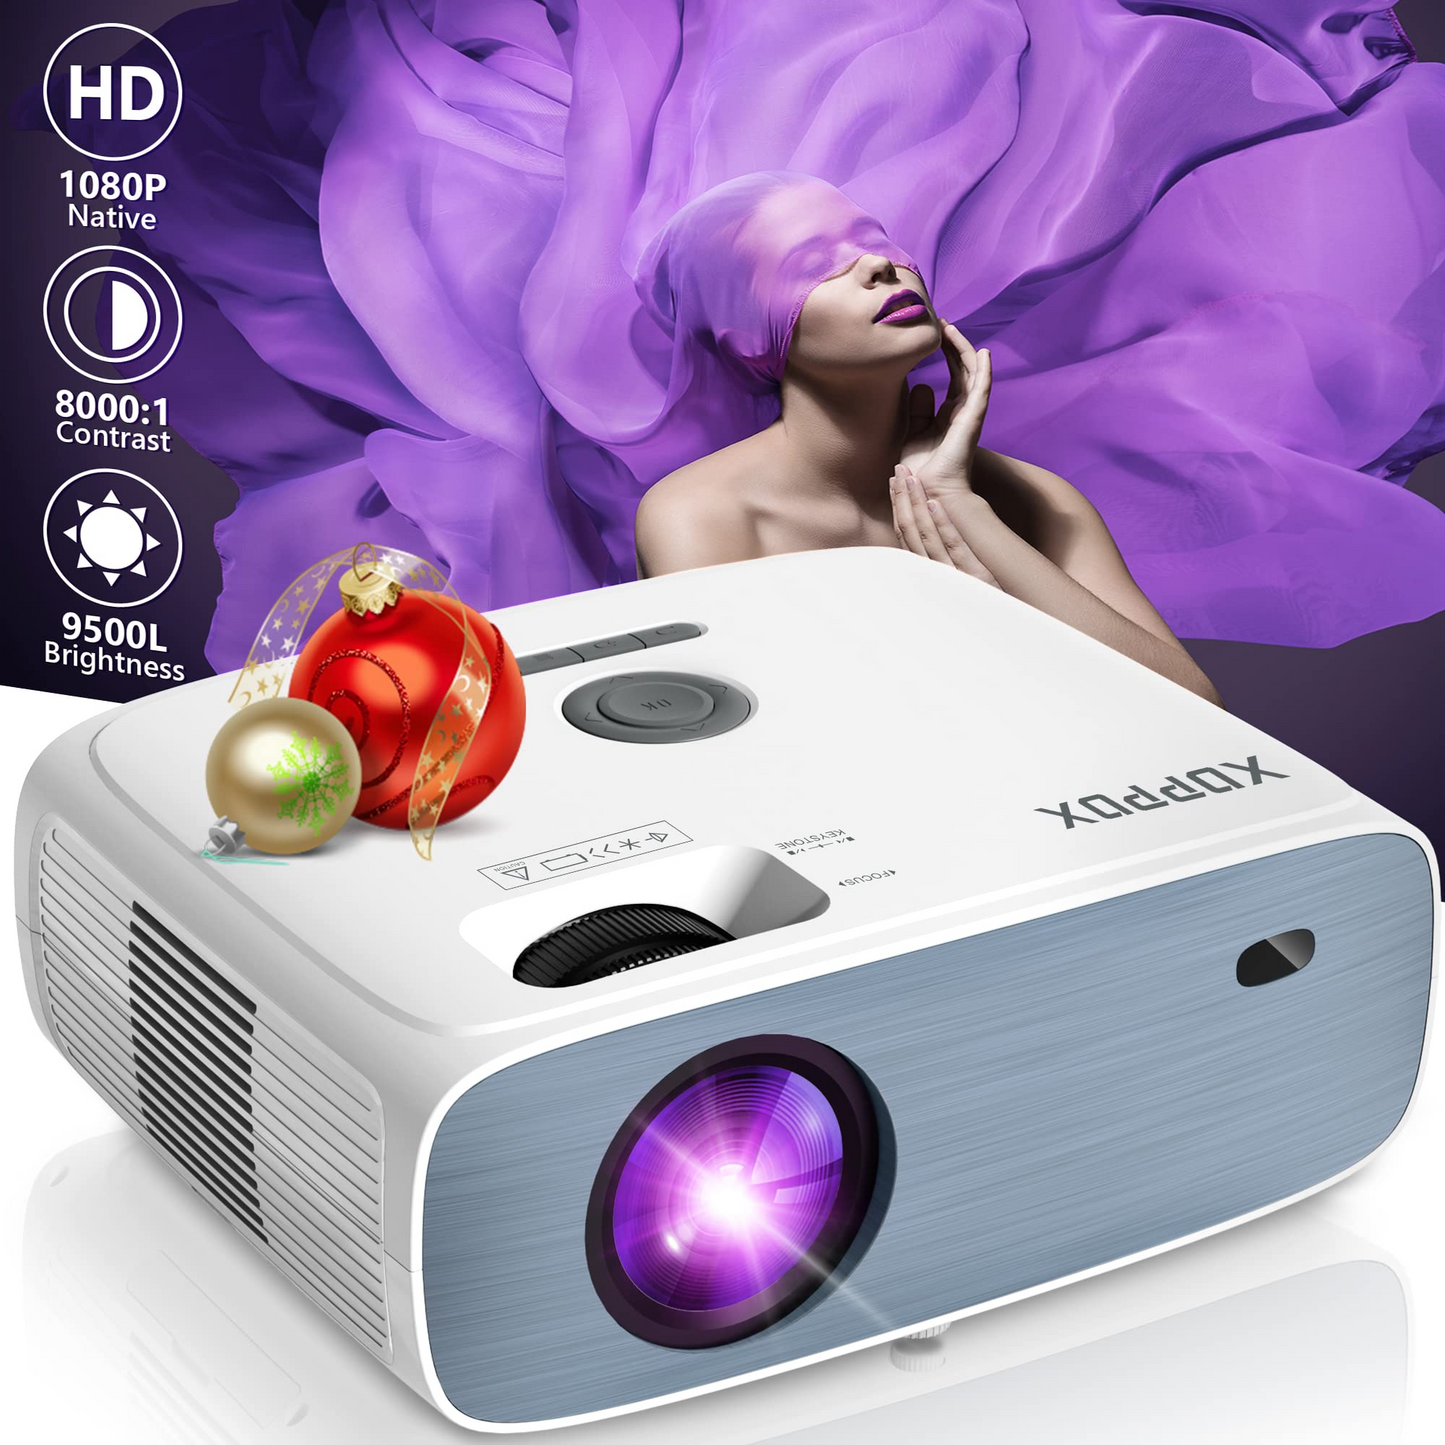 Outdoor Projector 1080P Native, XOPPOX Video Projector Full HD, Home Movie Projector 9500L & 8000:1 for Smartphone/PC/Laptop/PS4